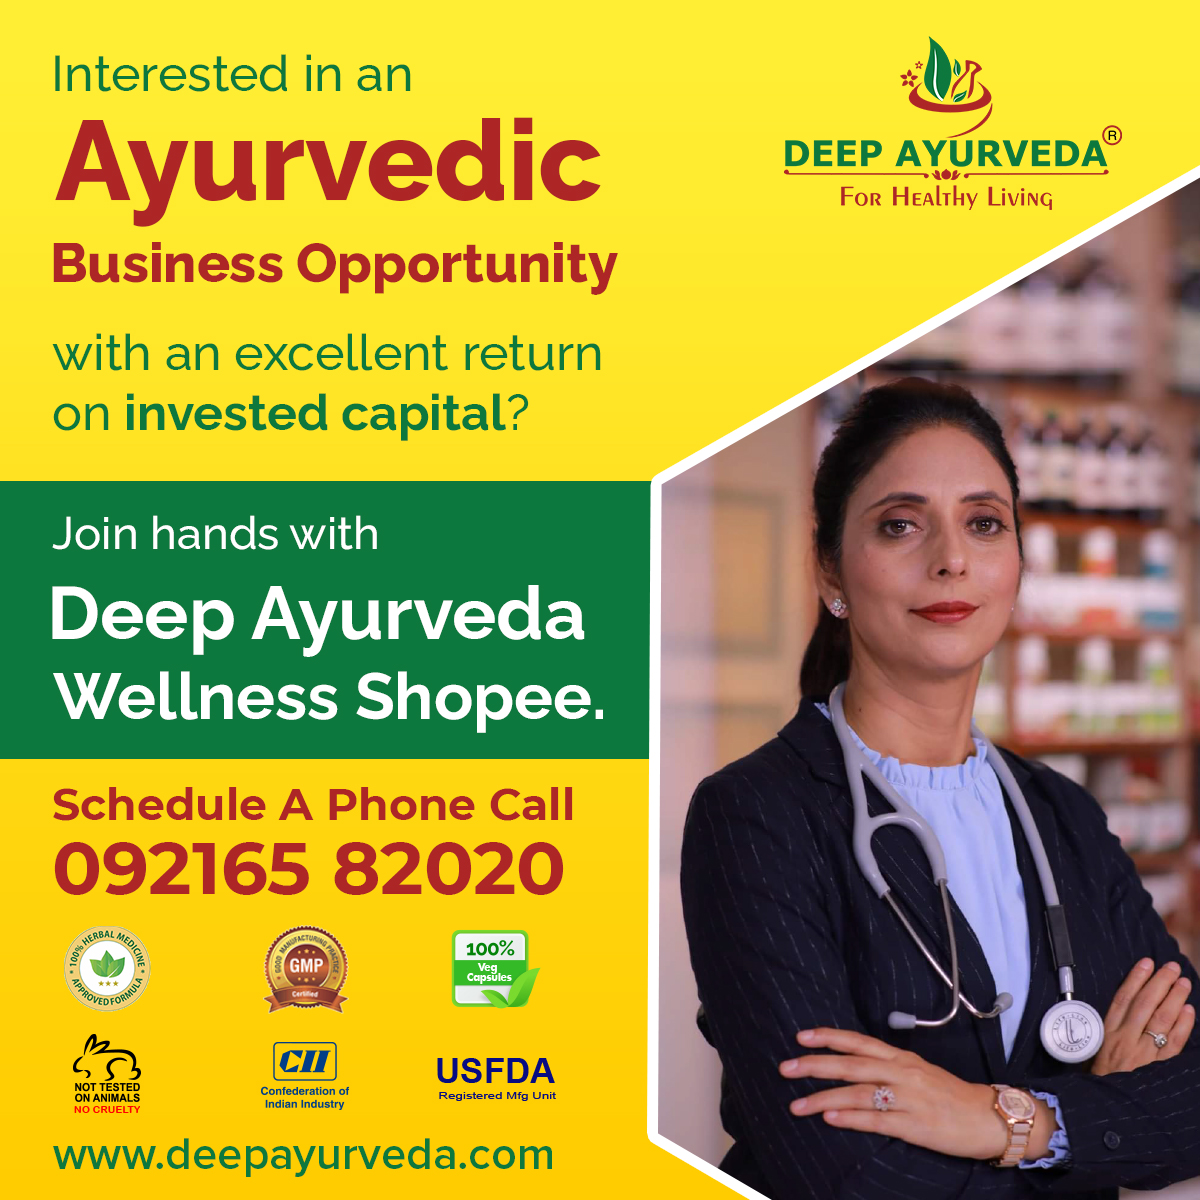 Interested in an #AyurvedicBusiness #opportunity with an excellent return on invested capital?

Join hands with #DeepAyurvedaWellnessShopee.

Schedule a phone call: 092165 82020

#NayaSocho #AyurvedSocho